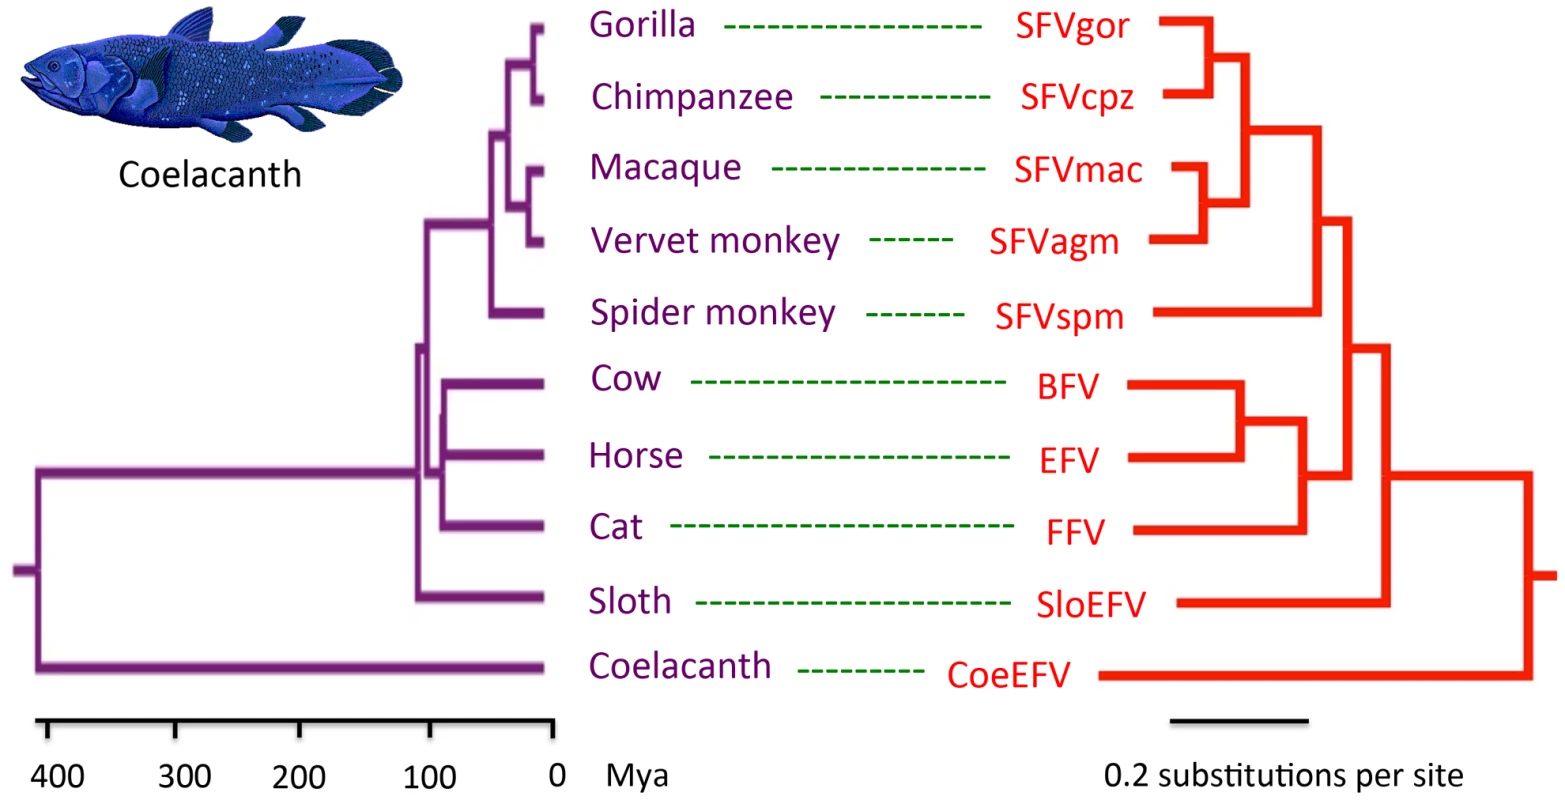 Phylogenetic congruence of foamy viruses (right) and their hosts (left).